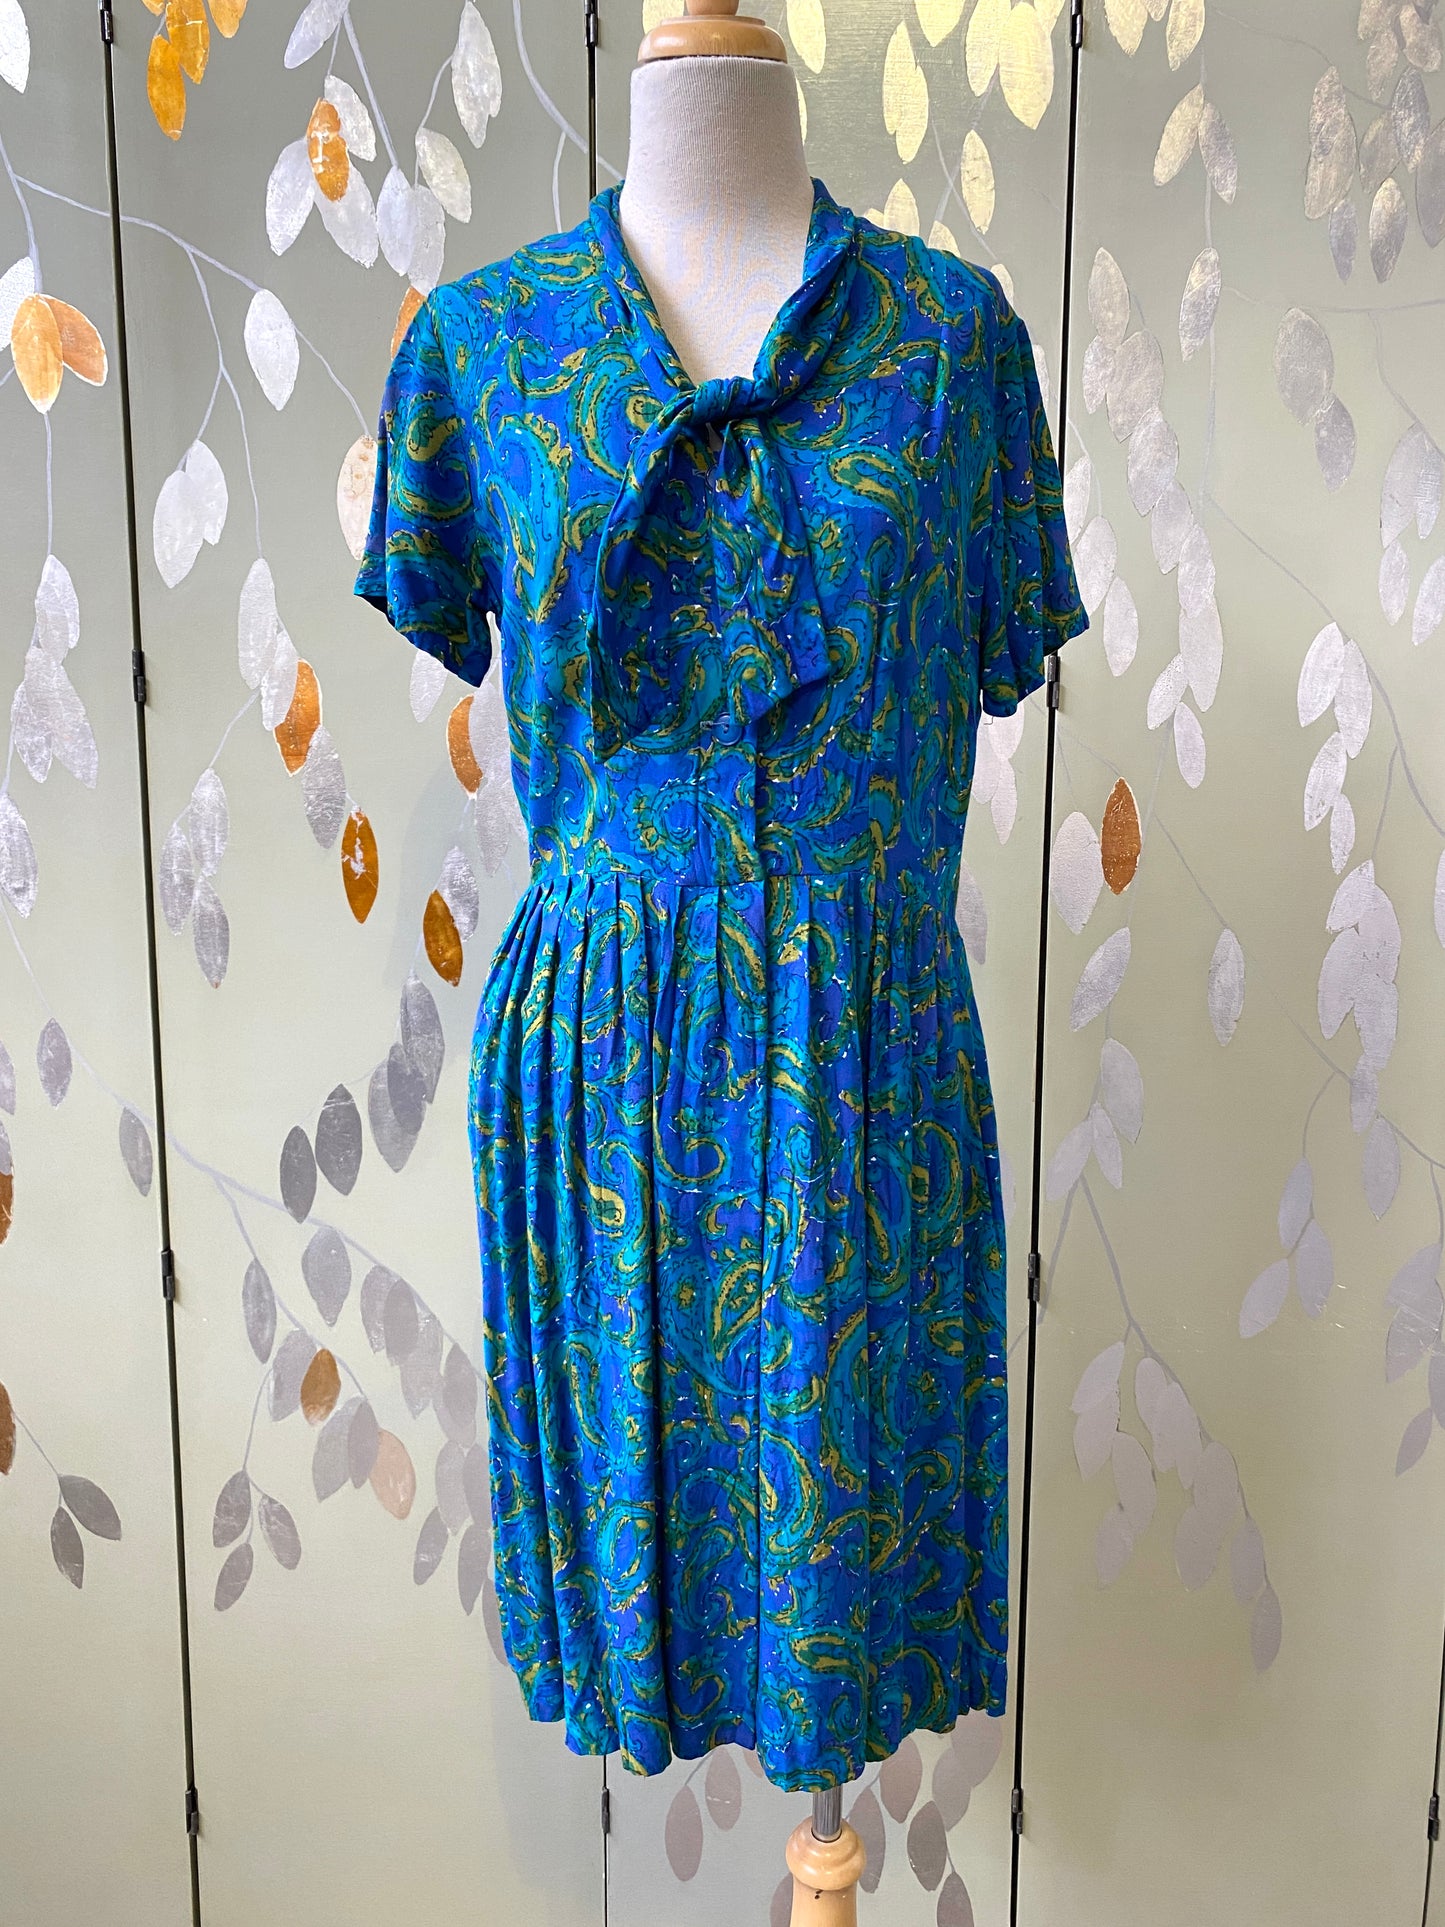 Vintage 1950s Jewel Tone Abstract Print Day Dress, Large